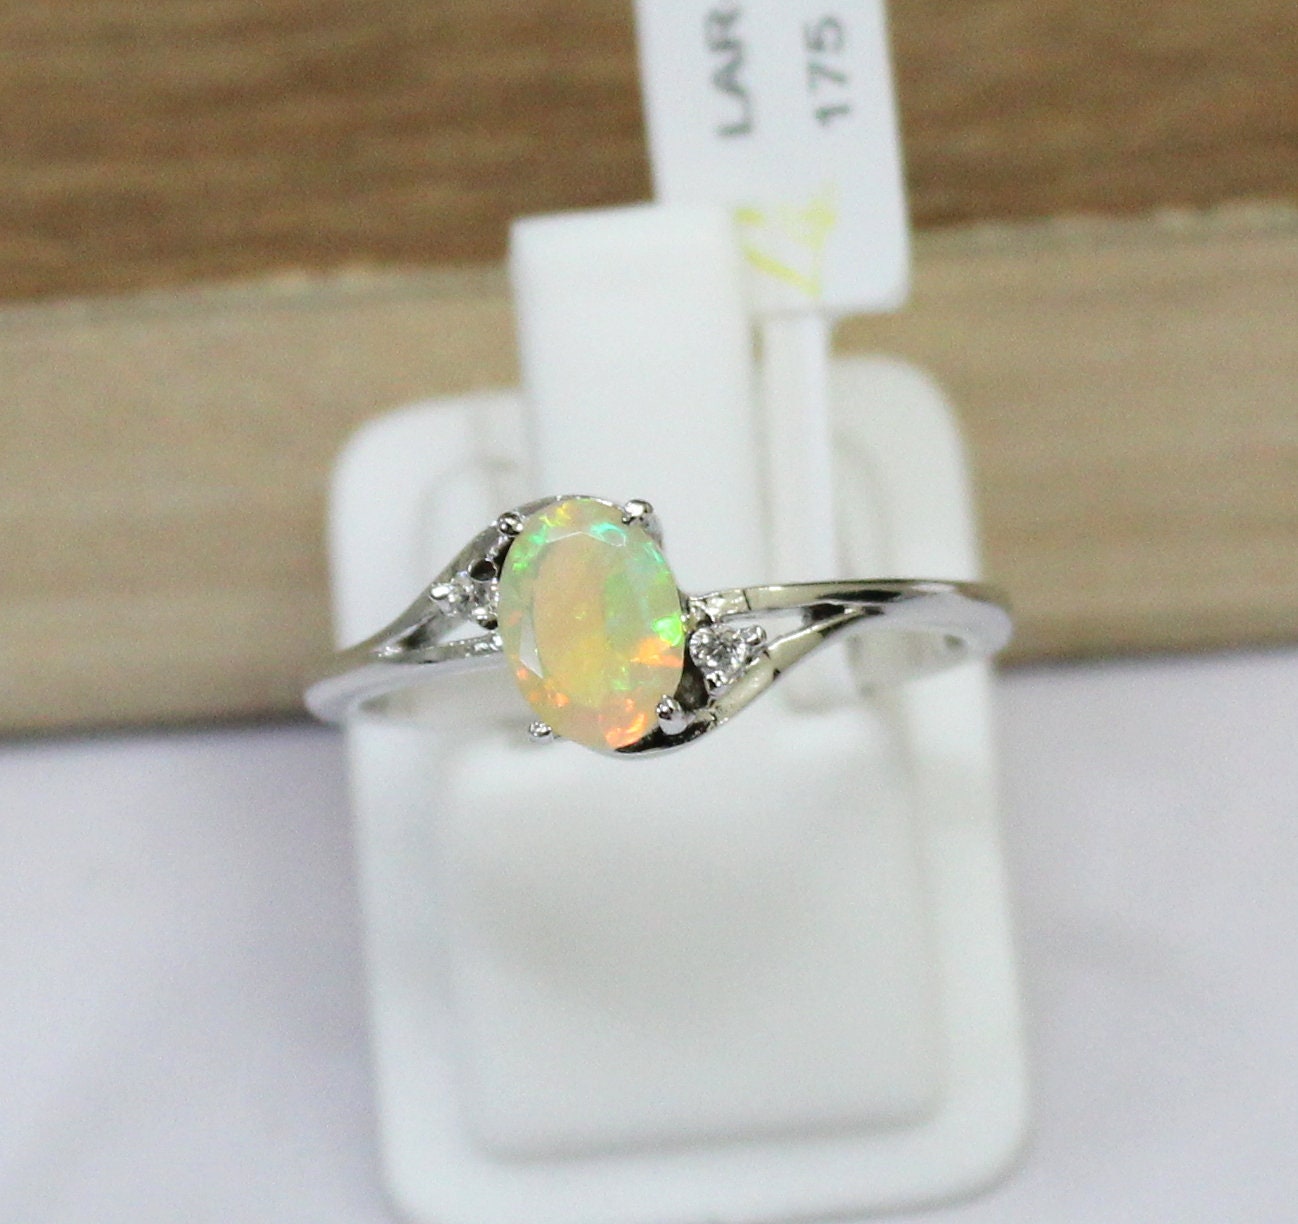 925 STERLING SILVER NATURAL ETHIOPIAN WELO FIRE OPAL RING JEWELRY SIZE US 3-13